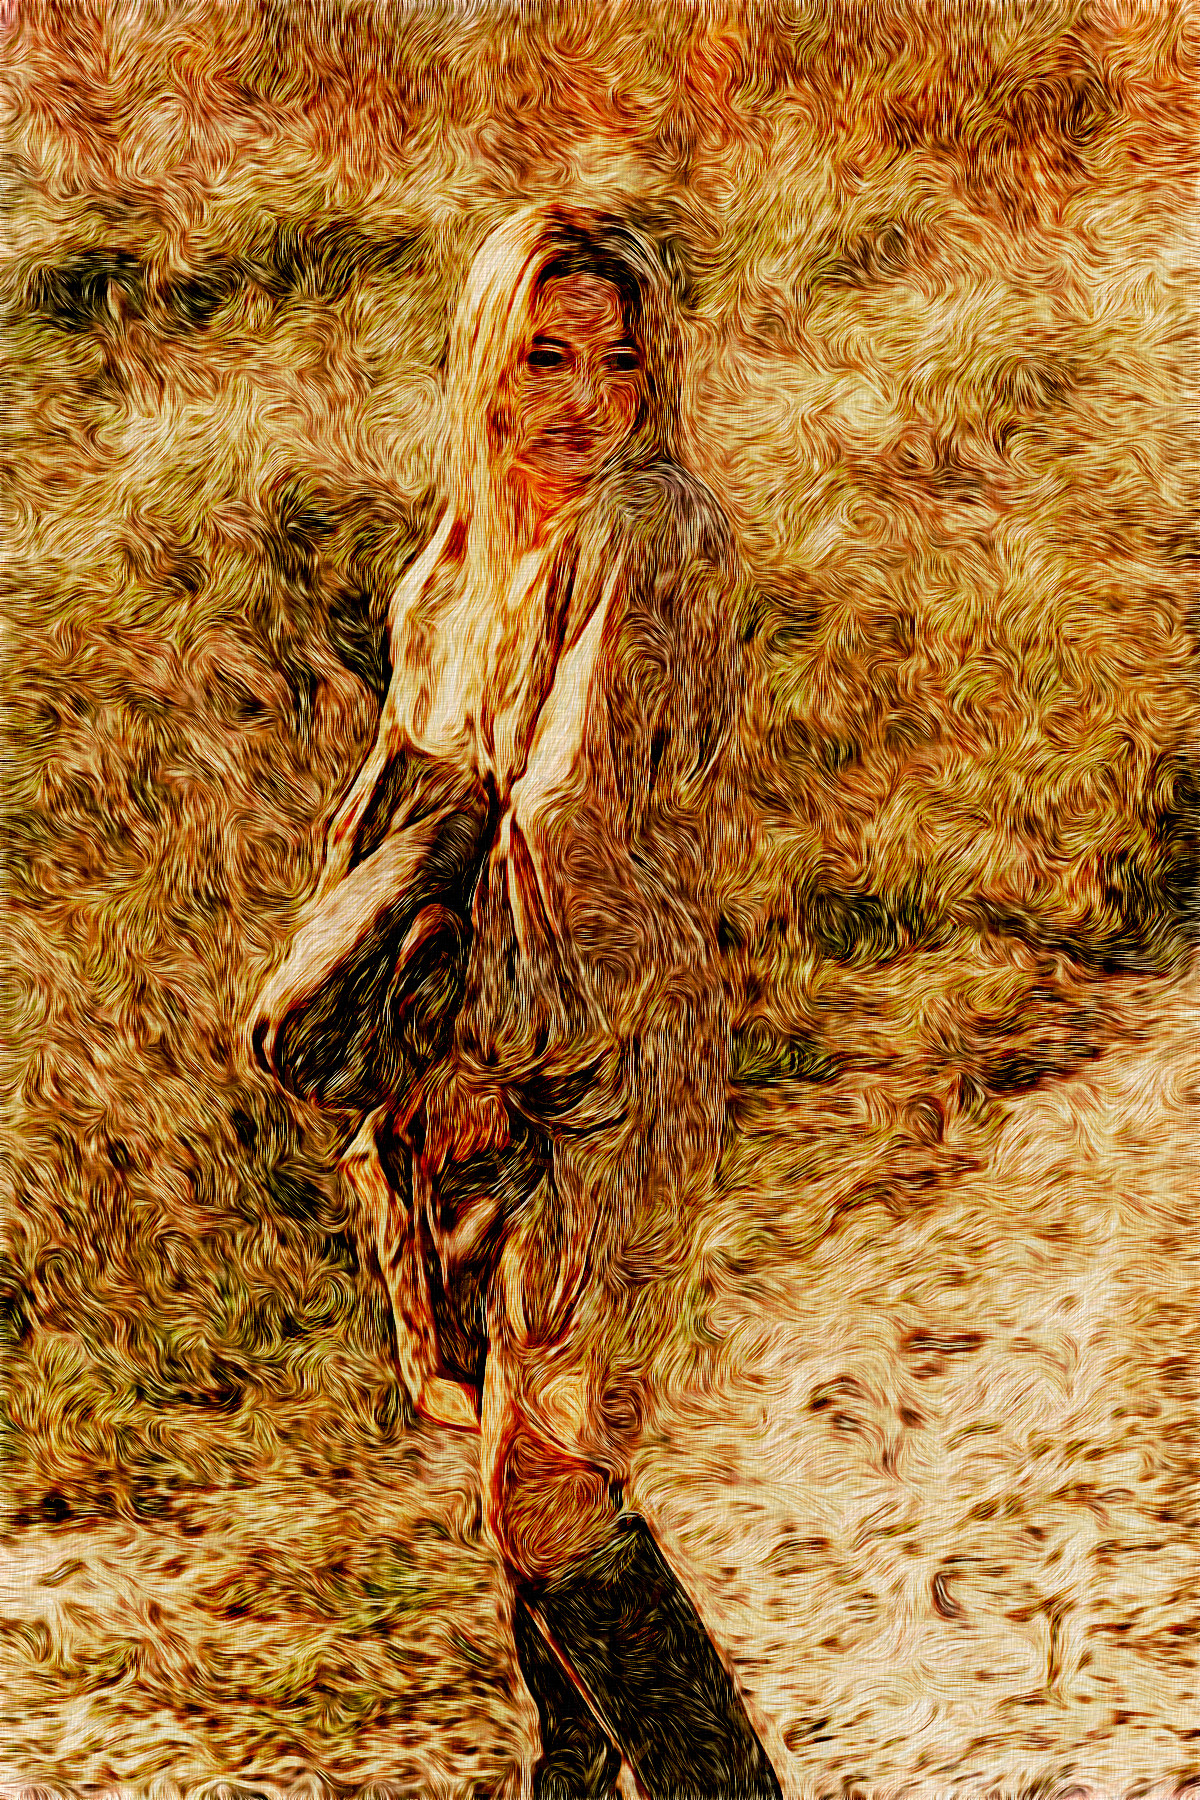 2021-09-30 07-15-44 pexels-nataliya-vaitkevich-6218460 with JVID effect R (Fake Impasto Paint Effect), parms =0, 3, 3, 2, 1, 0.01.jpeg